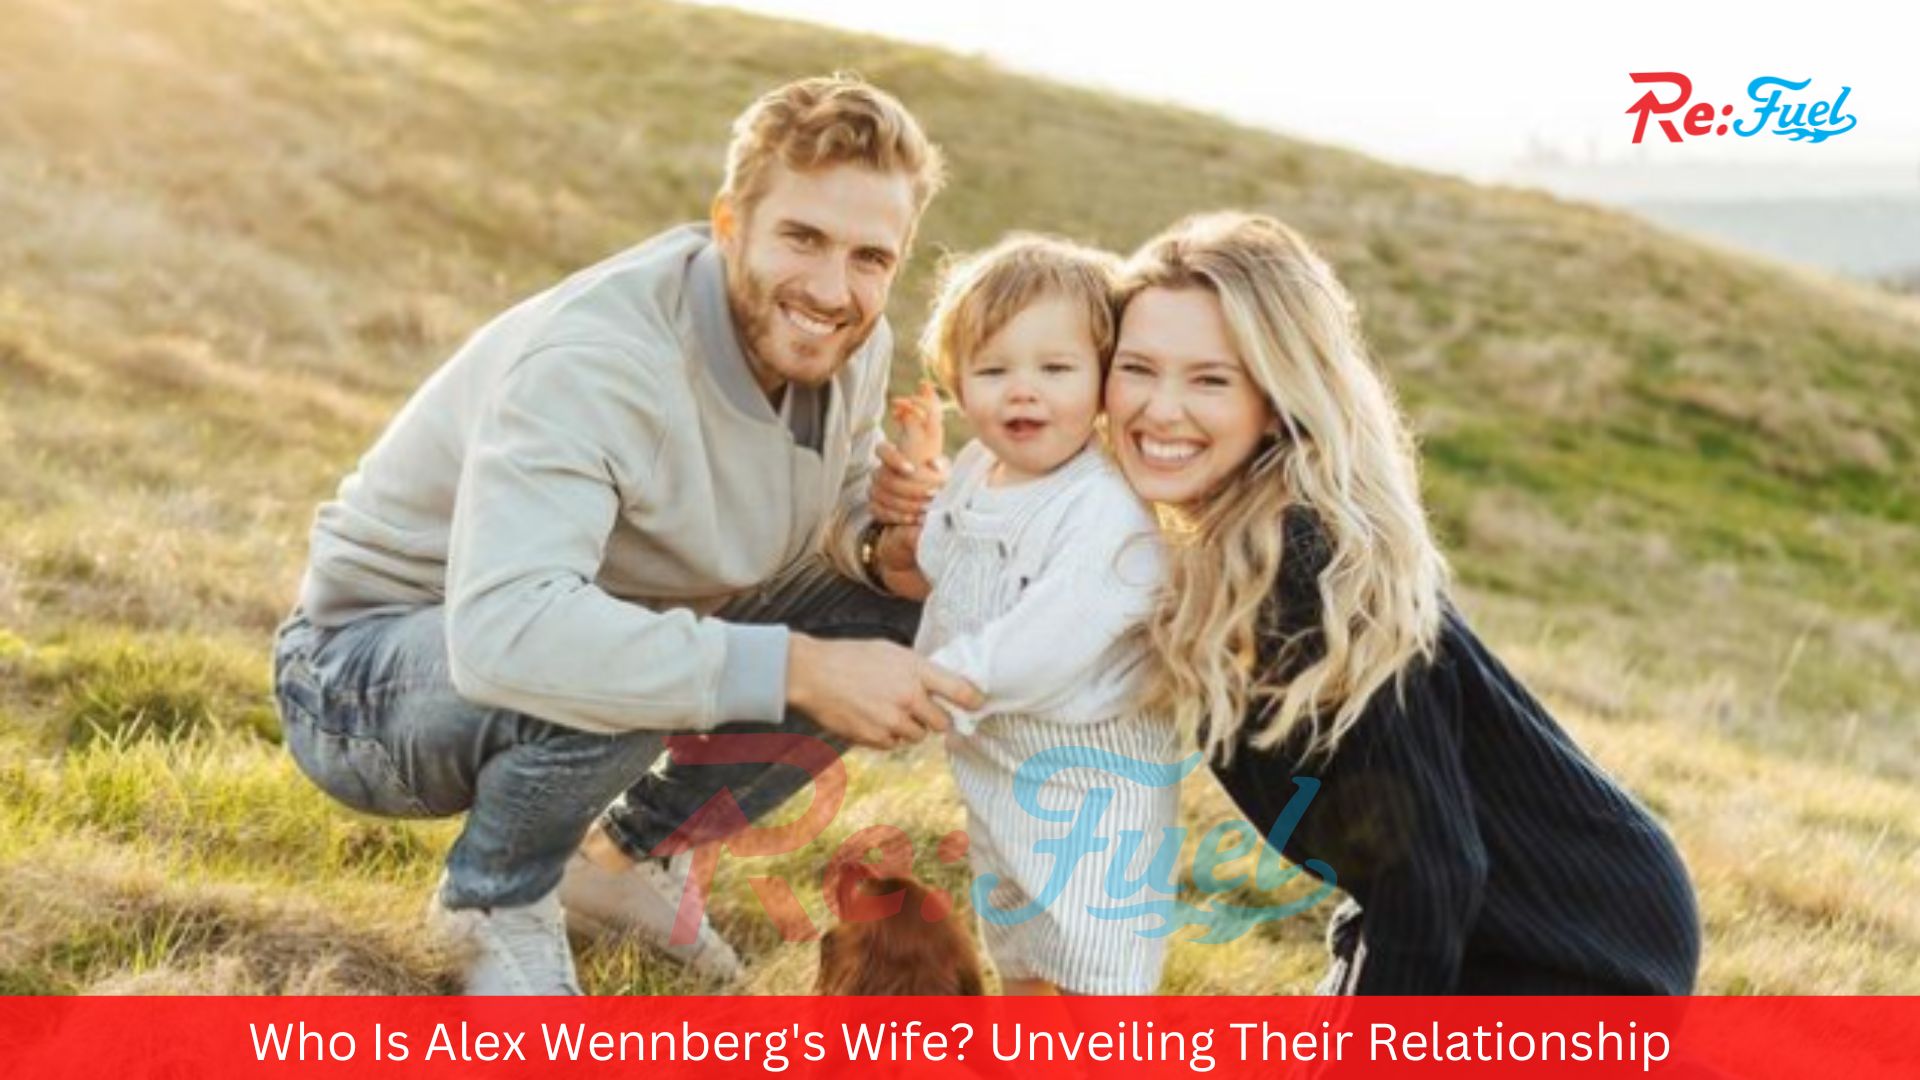 Who Is Alex Wennberg's Wife? Unveiling Their Relationship